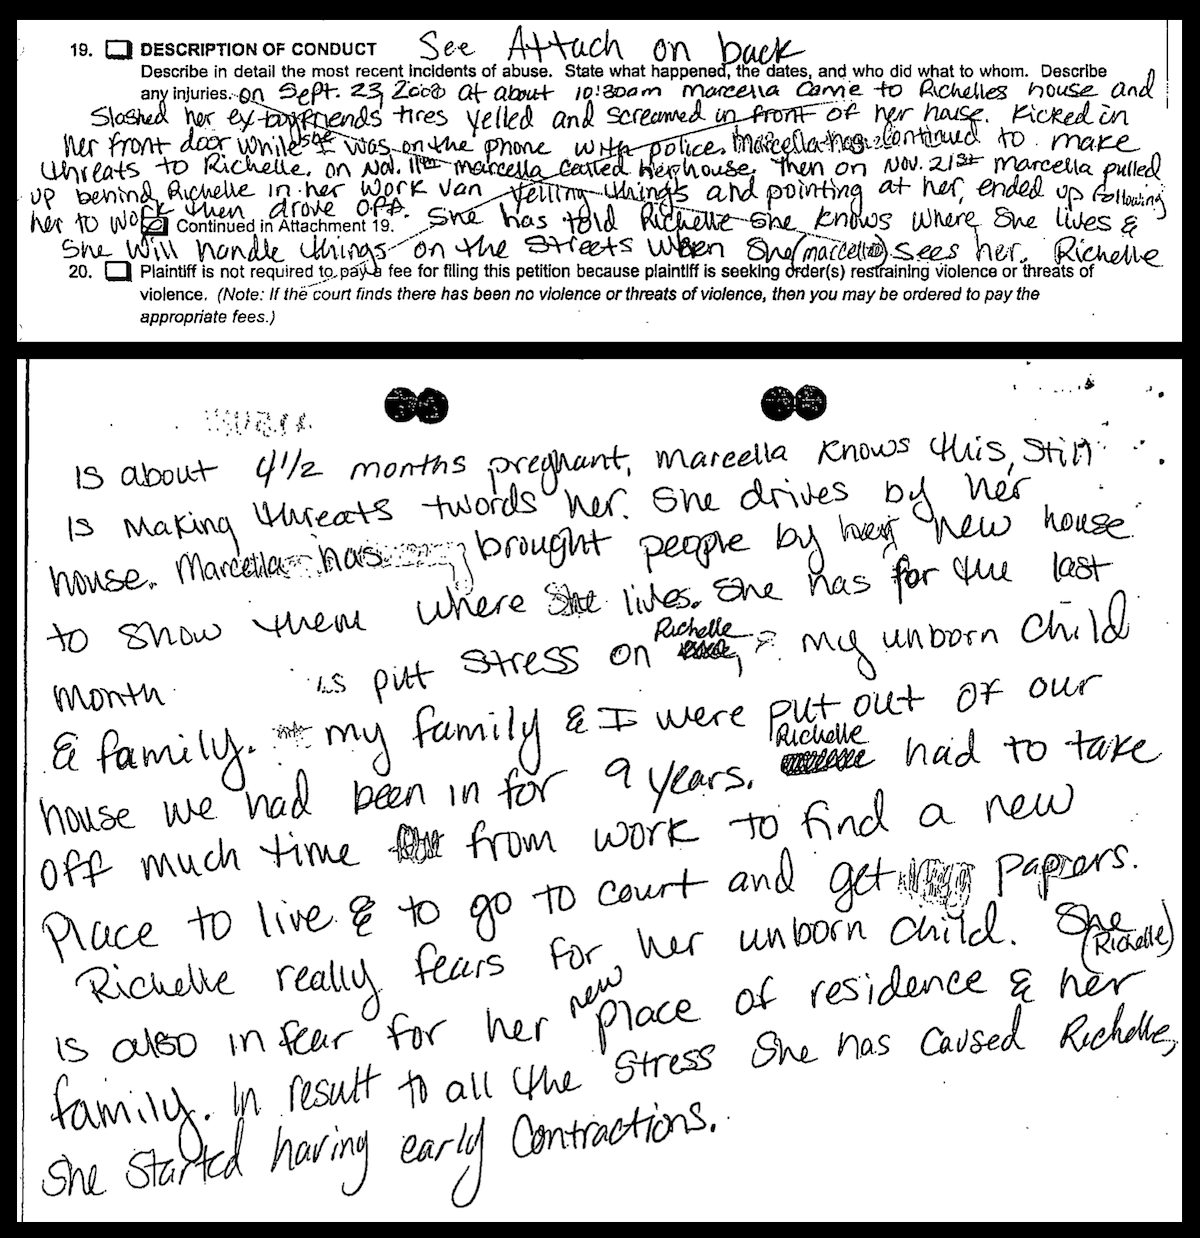 A case file captioned Richelle Nice v Marcella Kinsey drew the attention of Scott Peterson's defense team. In it, Nice said she feared for her unborn baby. The case was number 415040 in San Mateo, Calif. The document is dated Nov. 27, 2000.